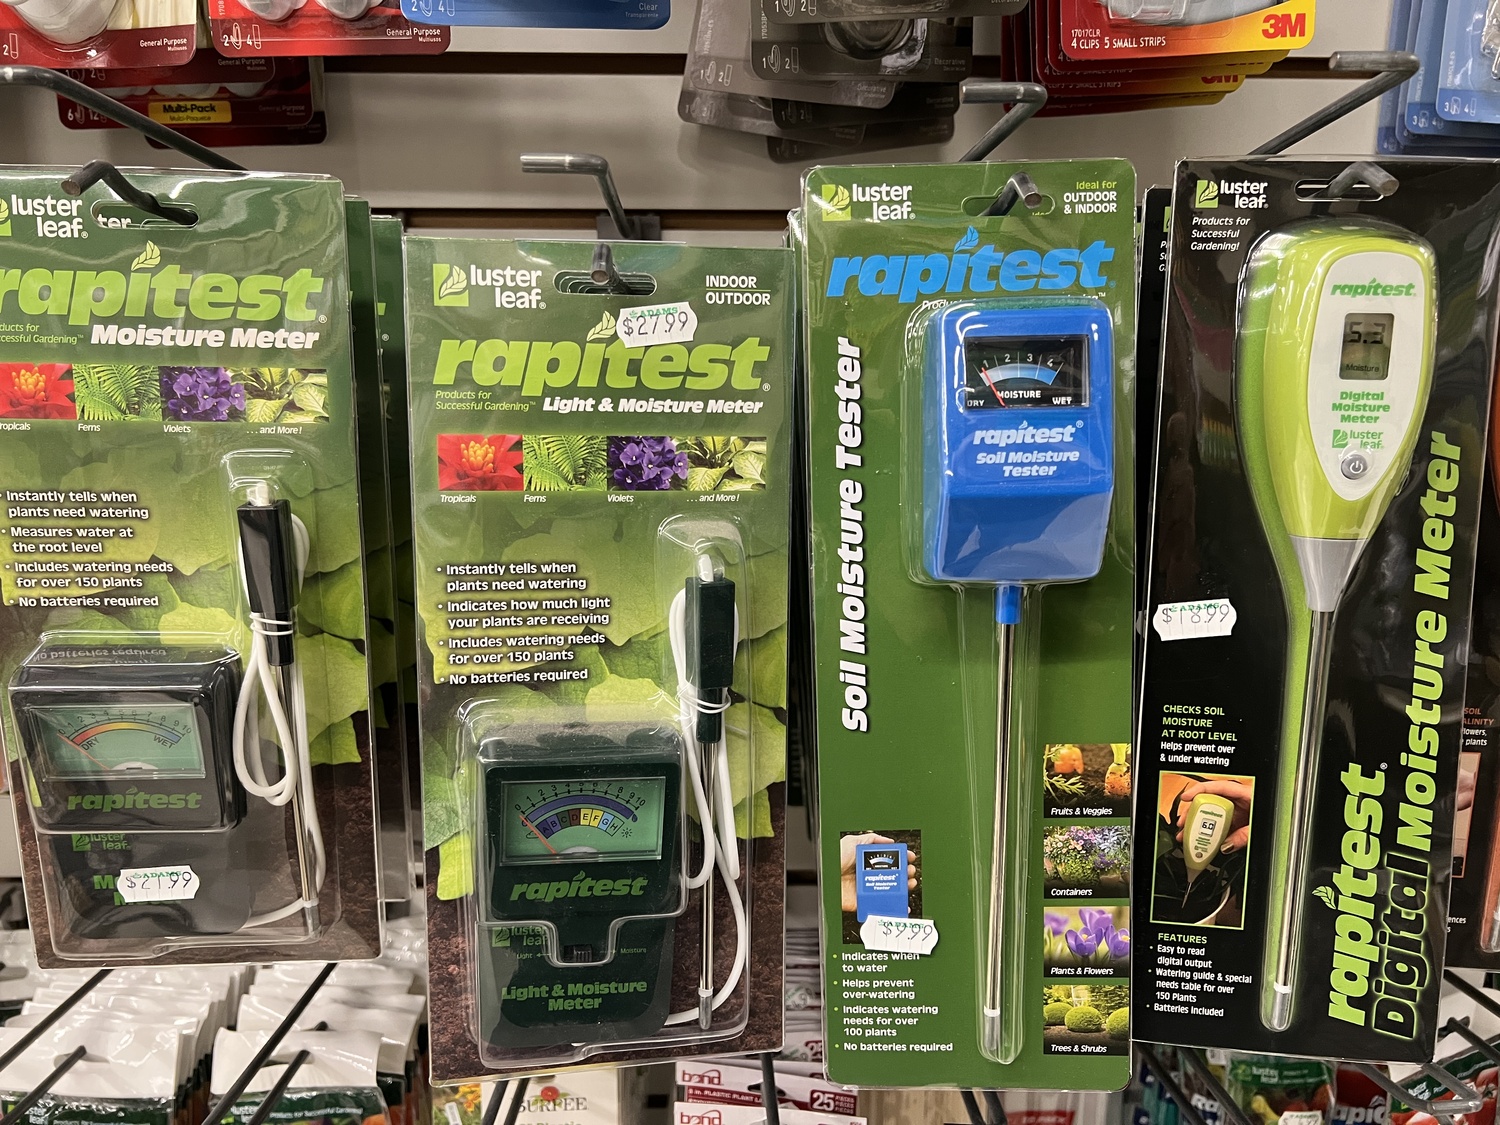 Want some help with knowing the amount of light you have in a certain spot or if your soil is too dry, too wet or just right? These meters are great tools to help, and with their guidance and some experience you won’t need them much. The blue Rapitest soil moisture tester is $10 and a great deal. Remember to clean off the bottom inch where the sensor is after you use it to keep the tool accurate. Only the tip, to the white line, is the moisture-sensitive portion of the probe. ANDREW MESSINGER